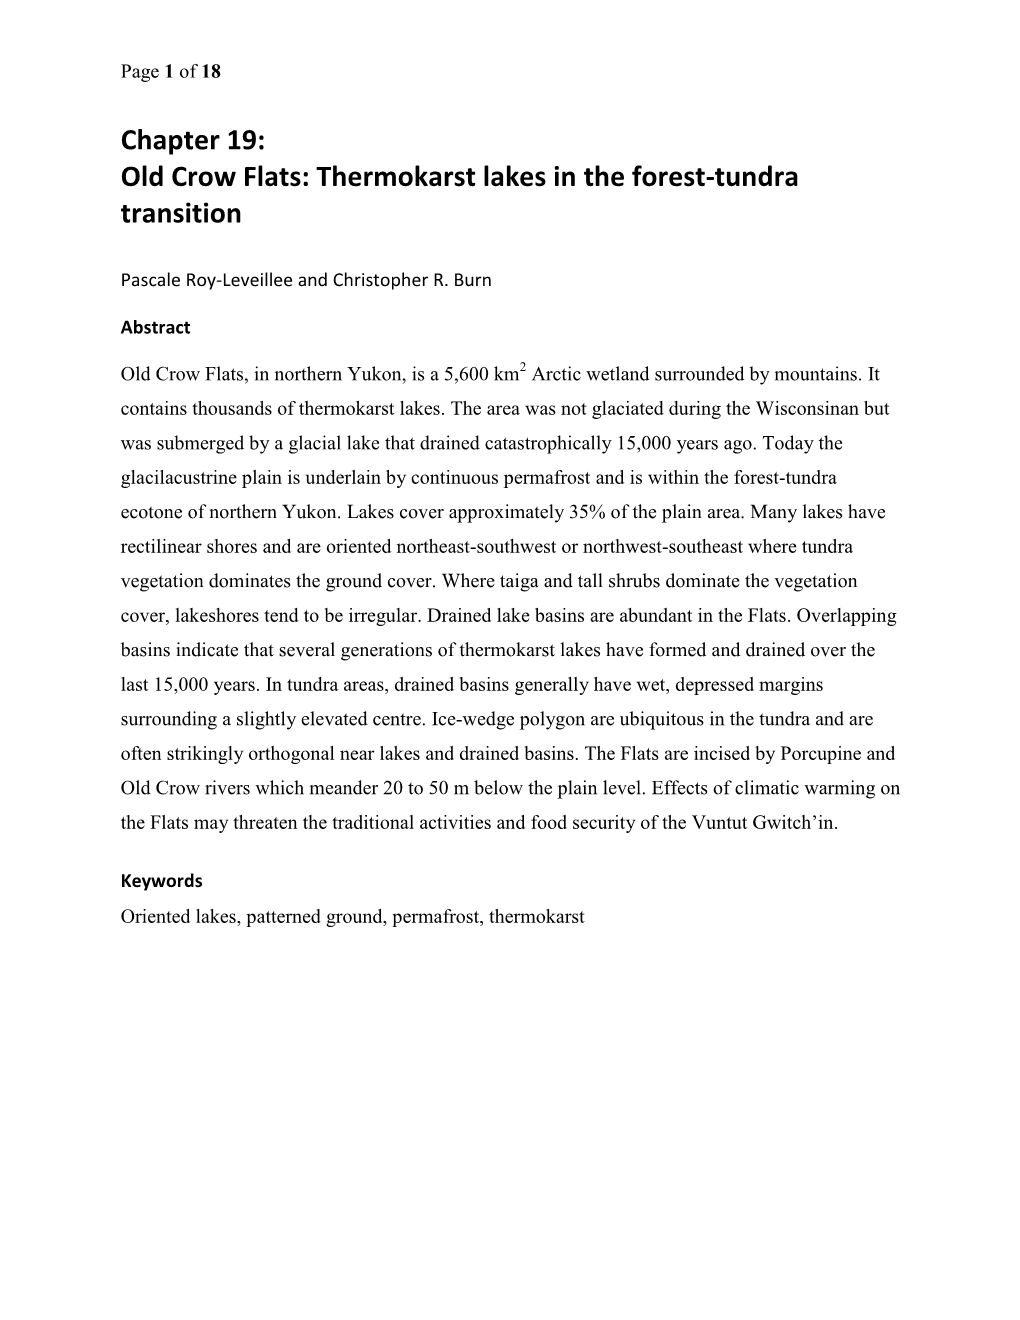 Old Crow Flats: Thermokarst Lakes in the Forest-Tundra Transition